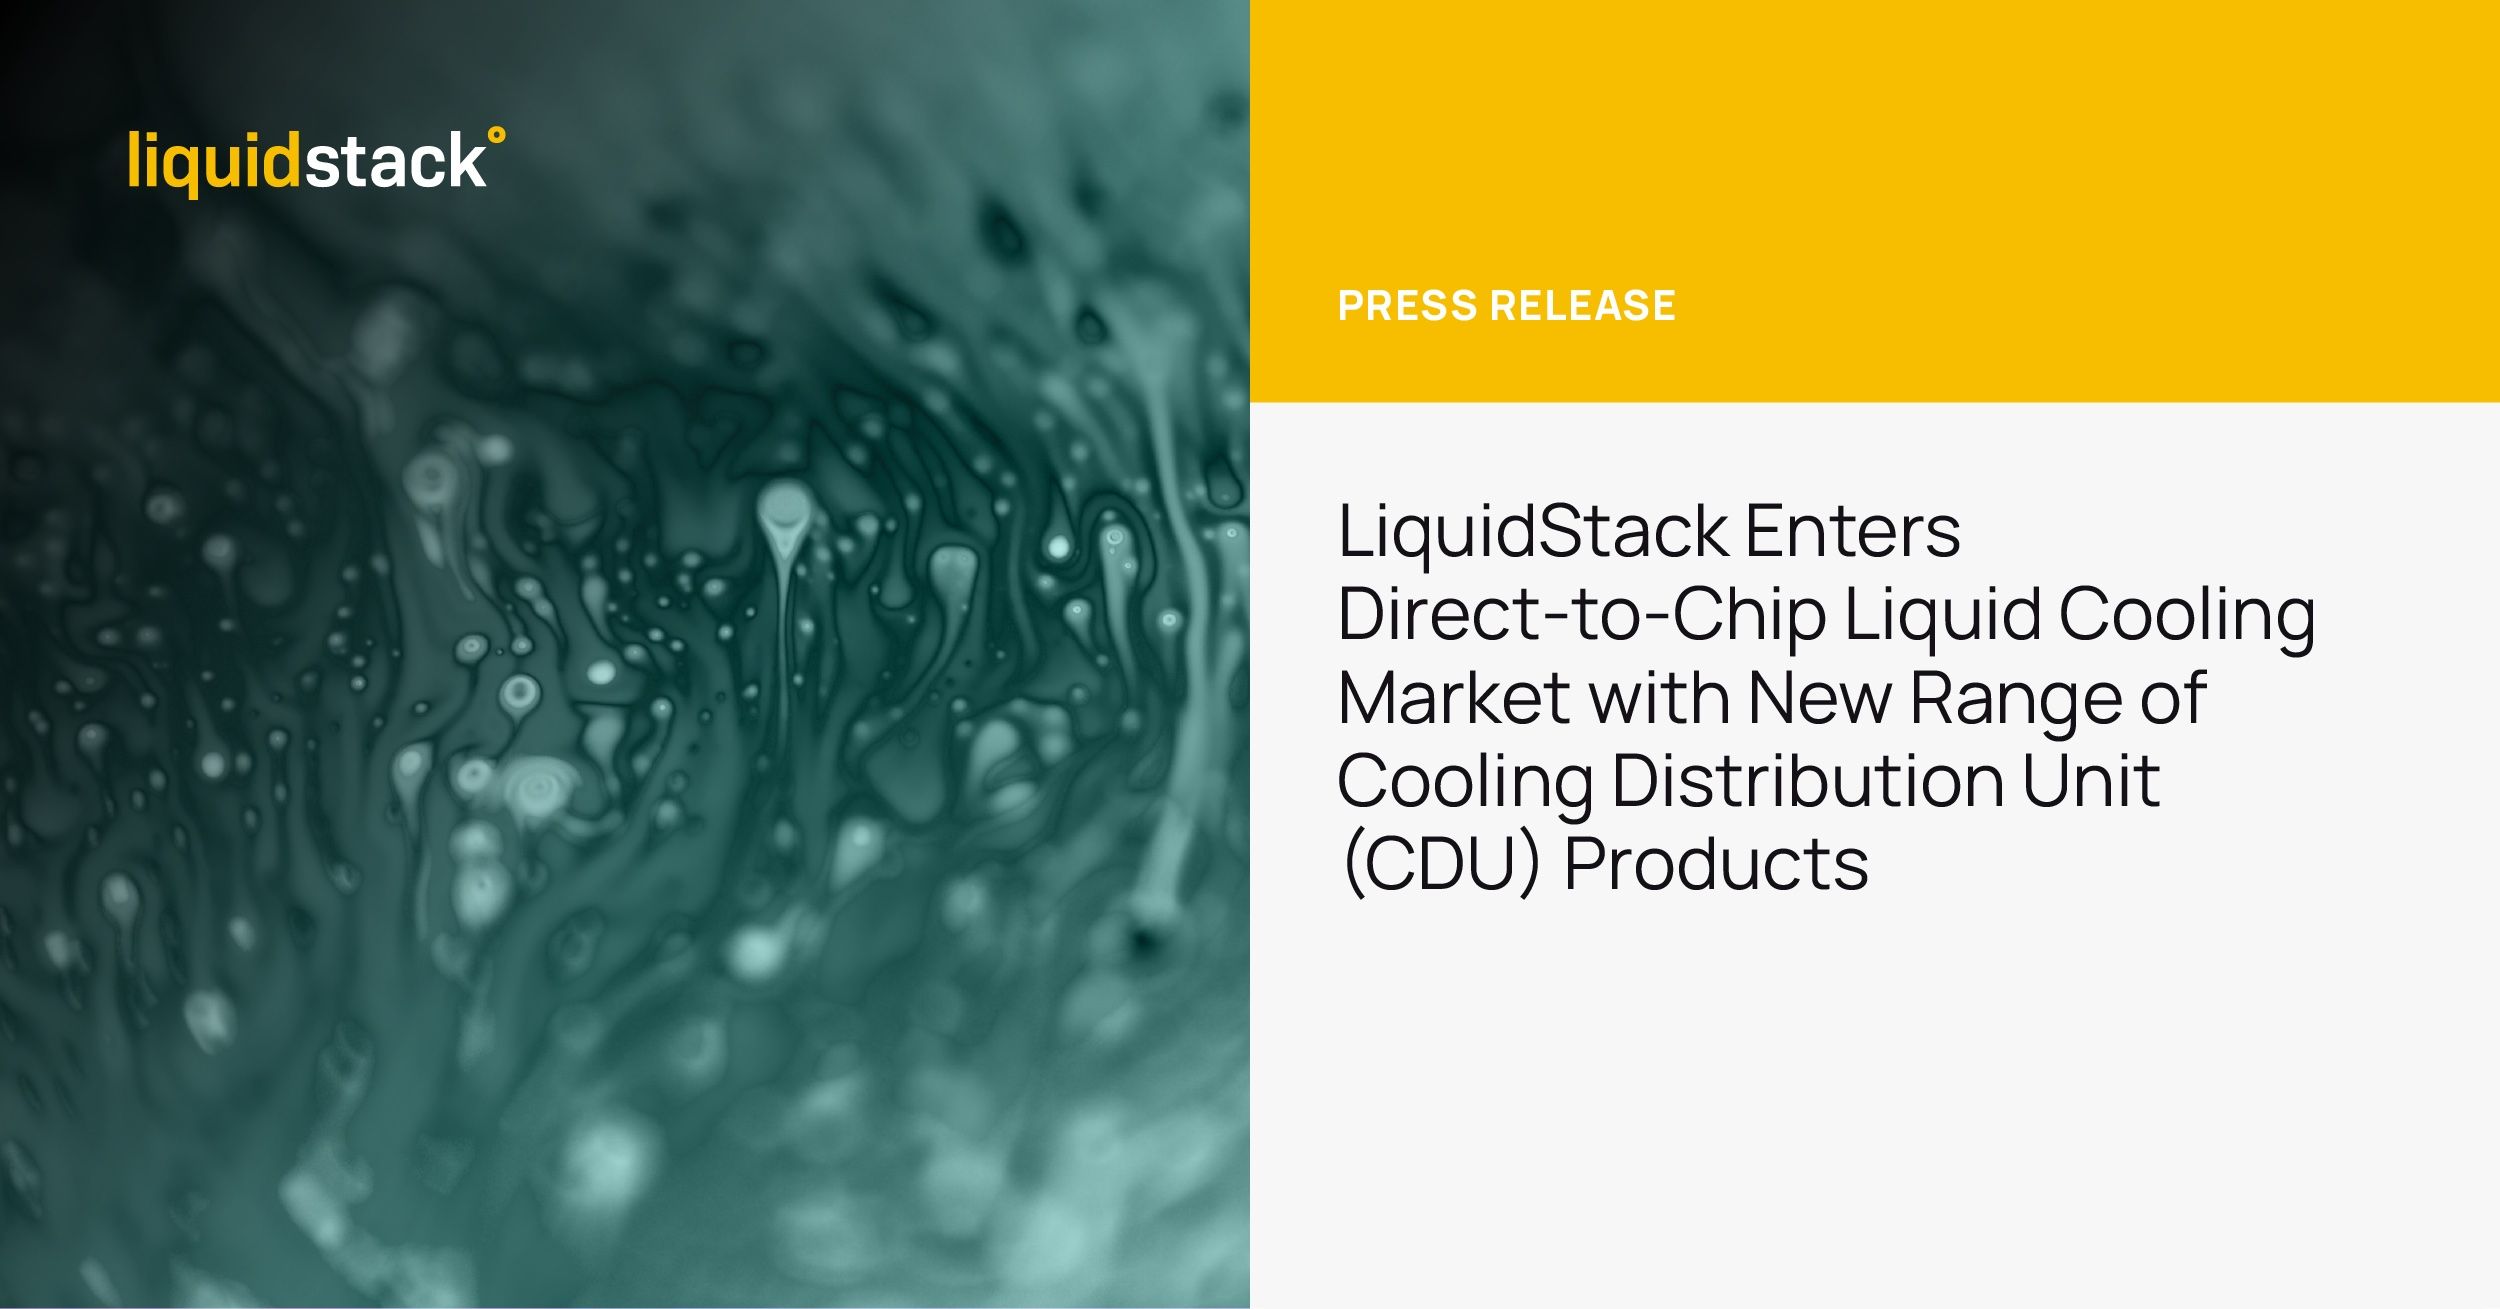 LiquidStack Enters Direct-to-Chip Liquid Cooling Market with New Range of Universal Coolant Distribution Units (CDUs)